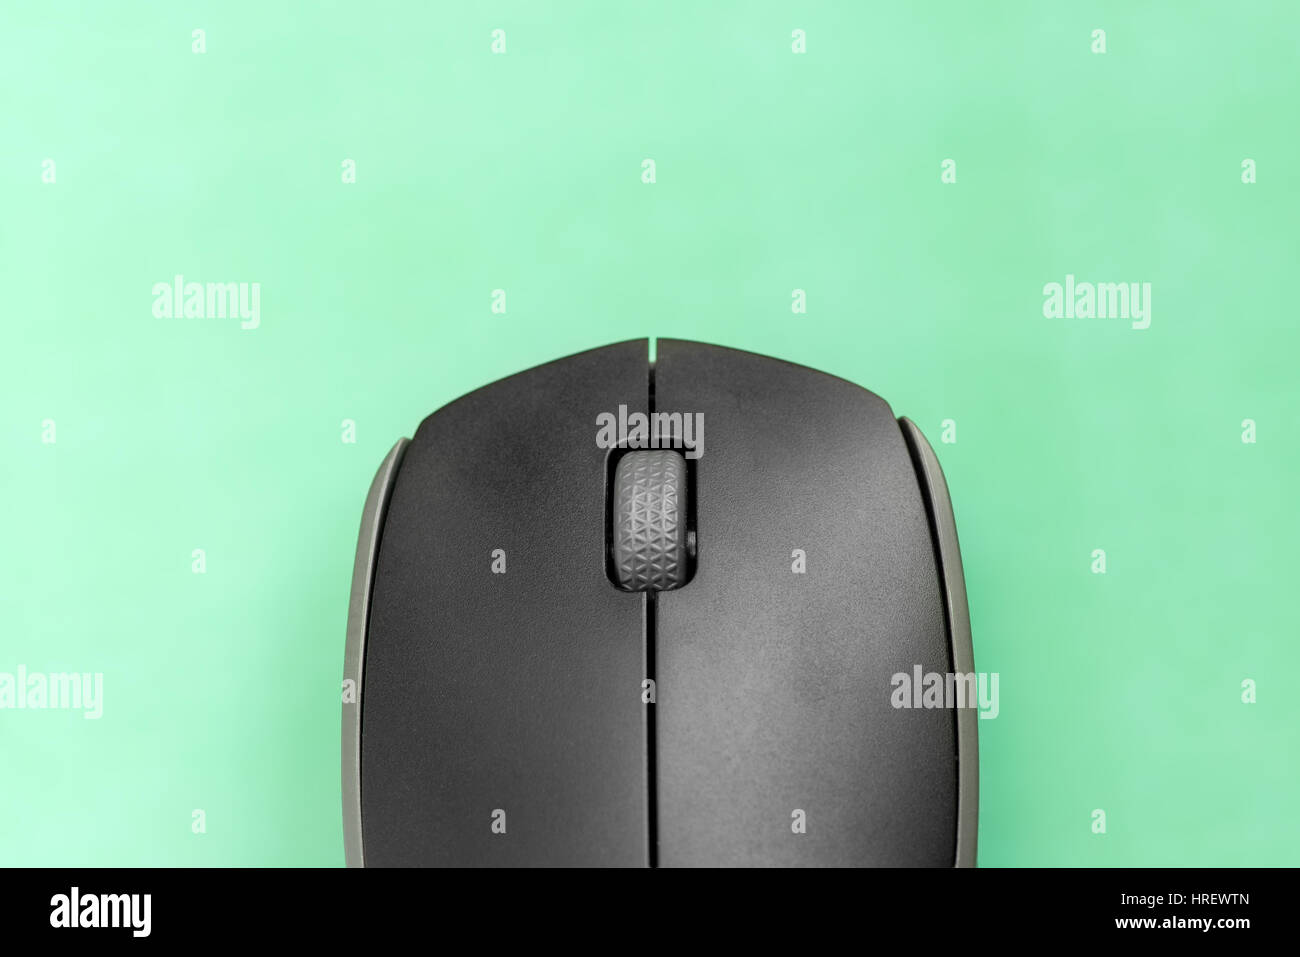 Computer mouse on green background Stock Photo